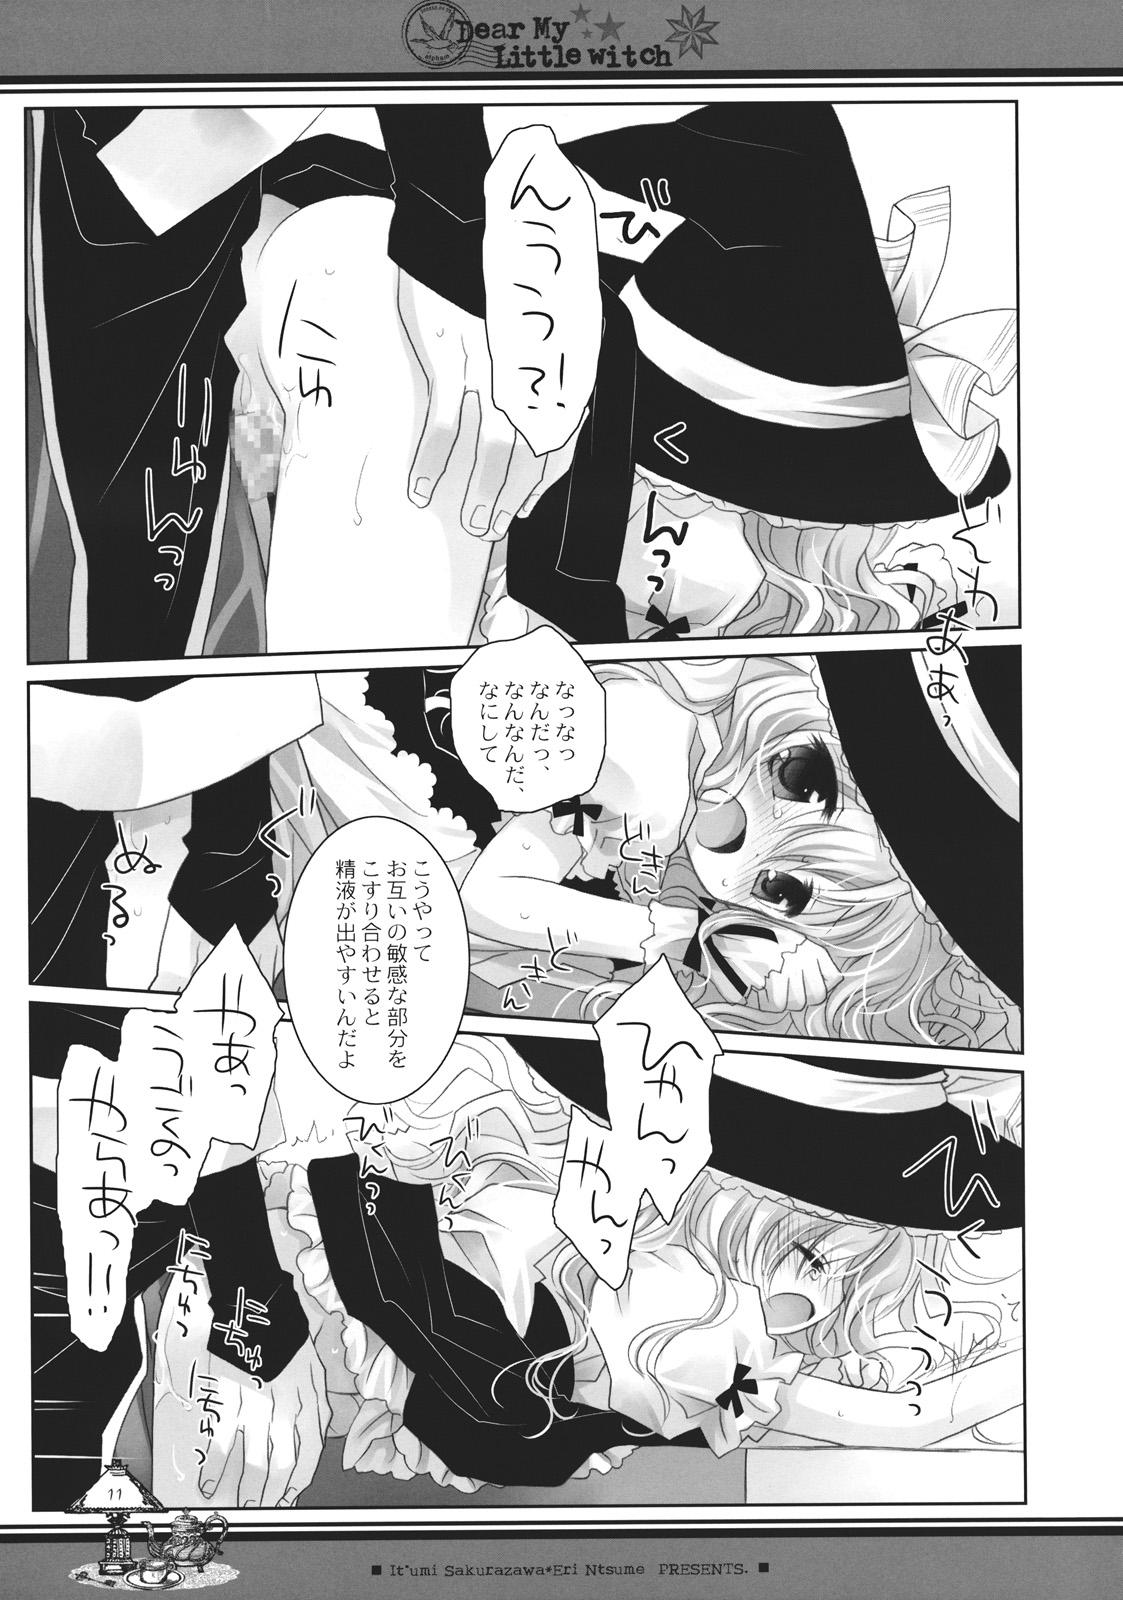 Interracial Hardcore Dear My Little Witch - Touhou project Fucks - Page 11